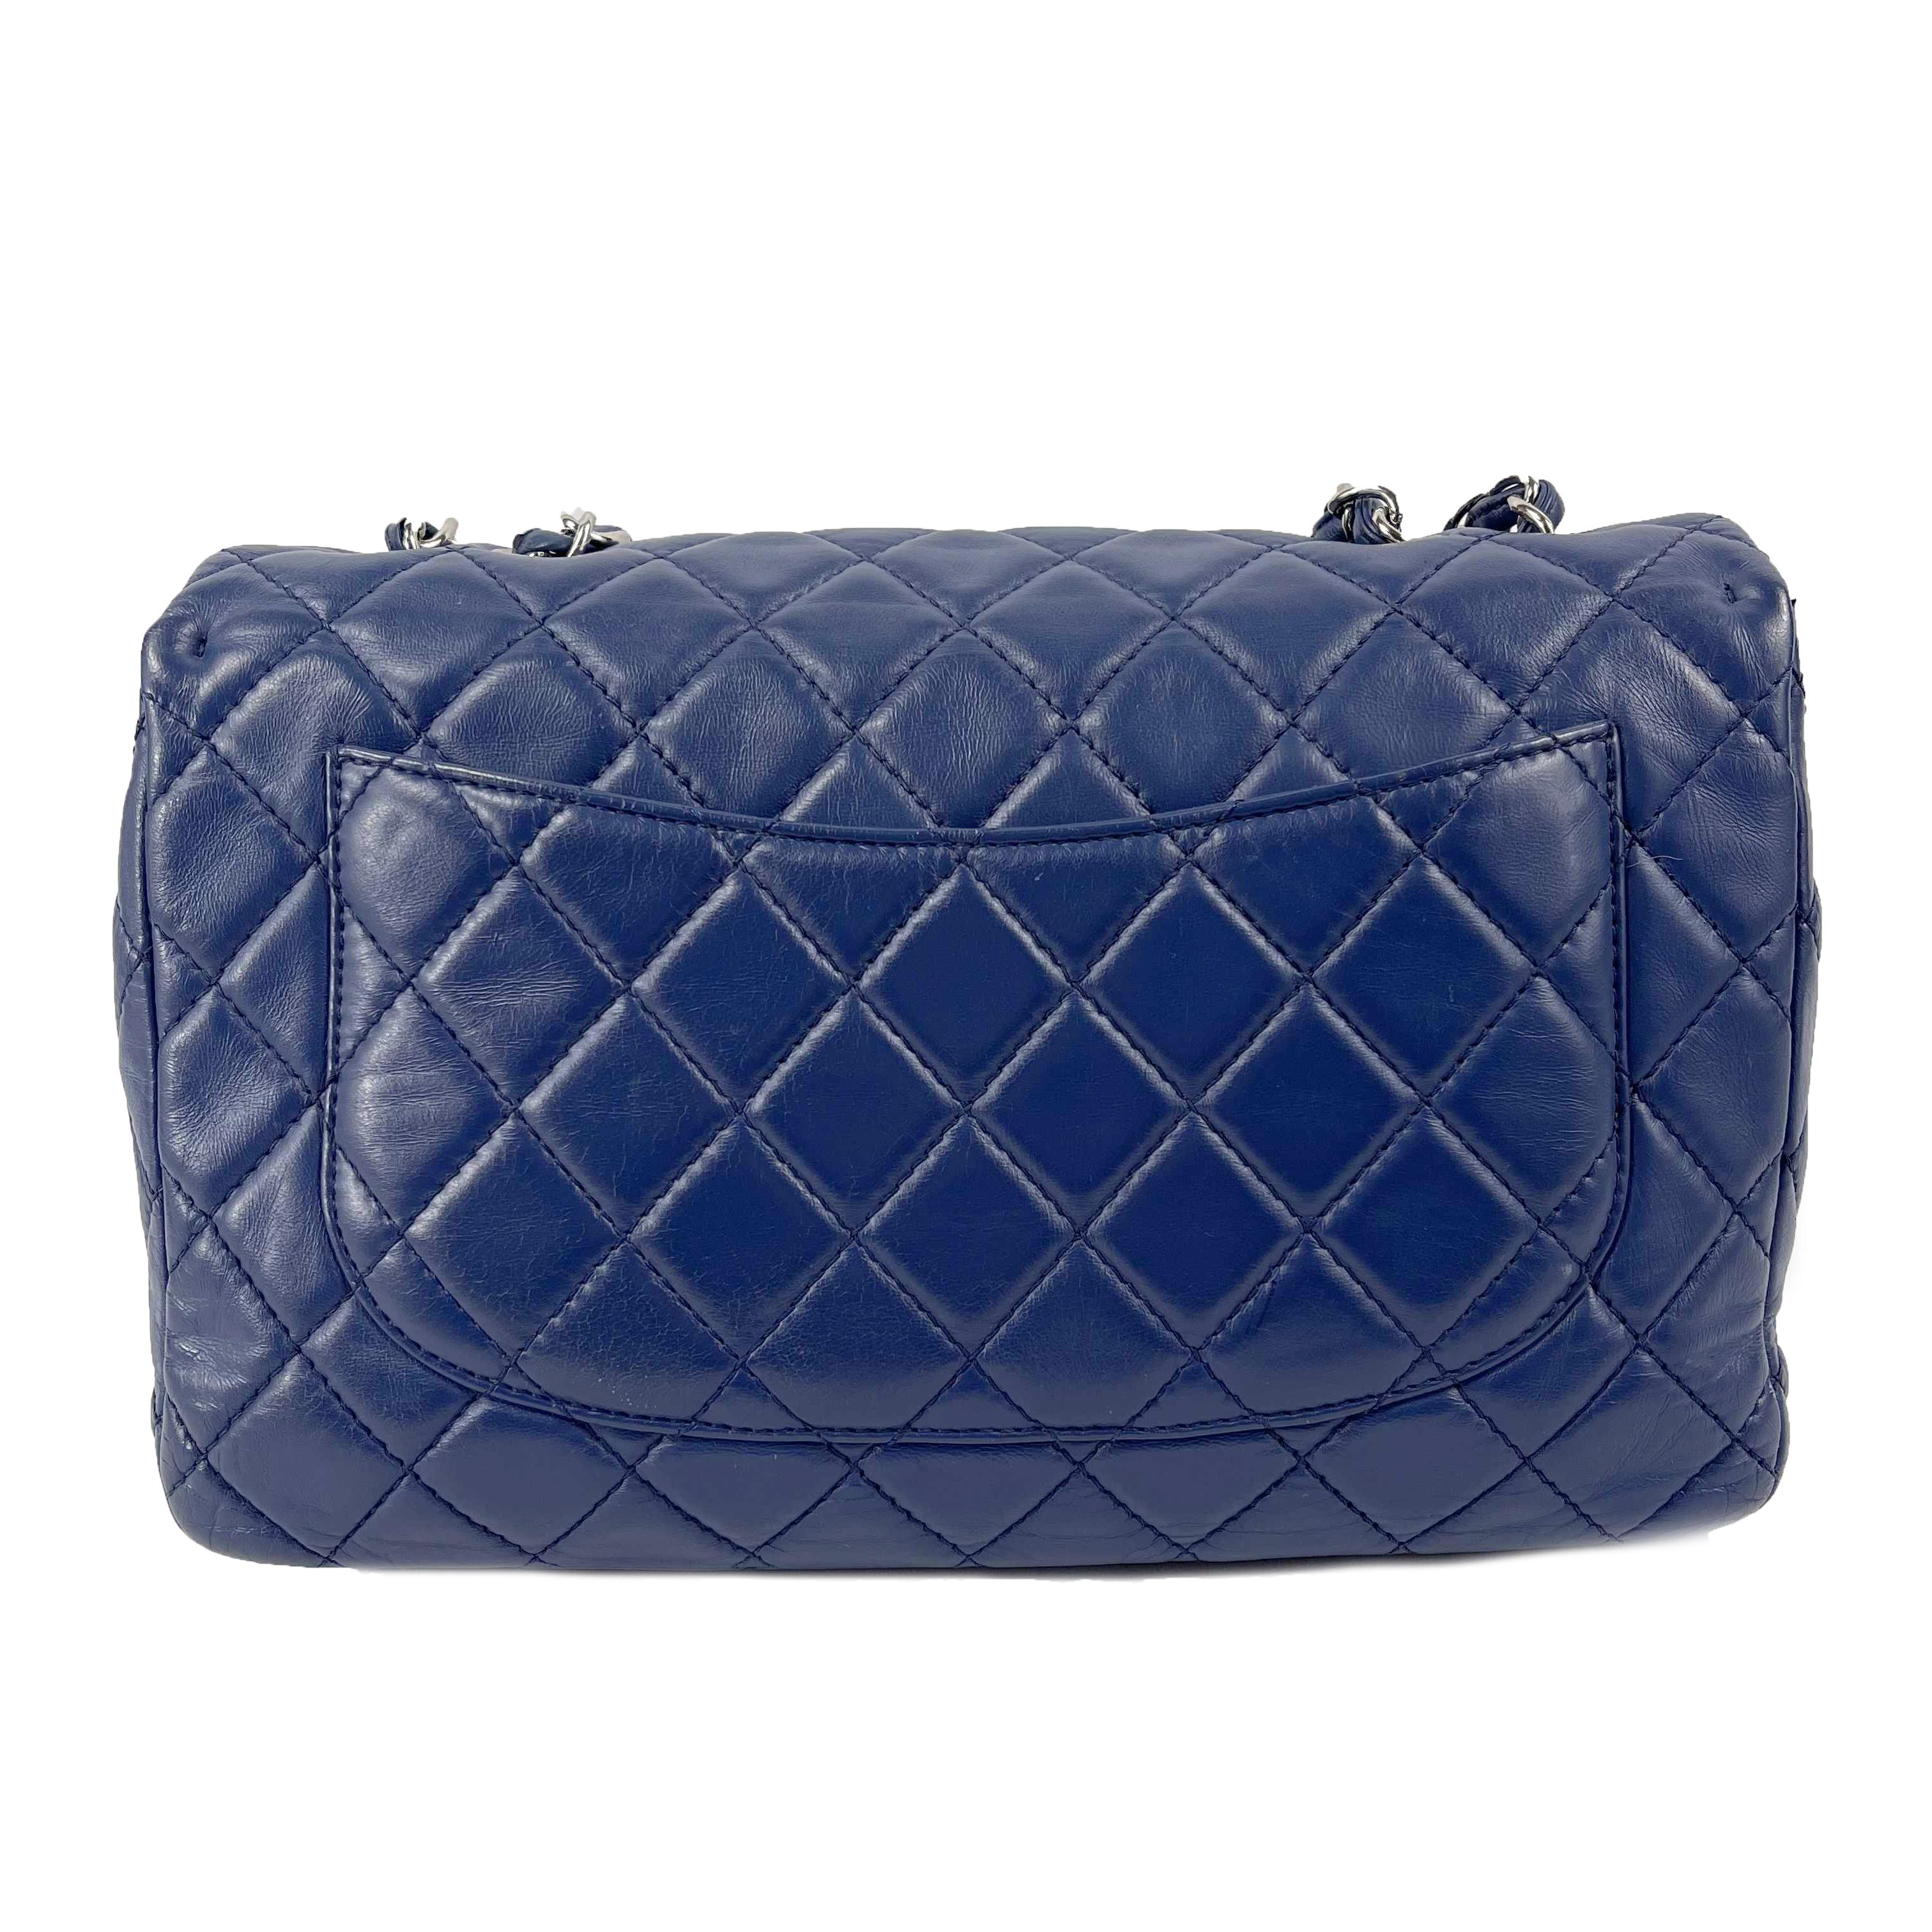 CHANEL - Classic Single Flap Bag - Blue Quilted Lambskin Maxi Shoulder Bag 

Description

This stylish 2008 Chanel shoulder bag is crafted of soft and smooth diamond quilted lambskin leather in royal blue. The bag features a silver chain-link